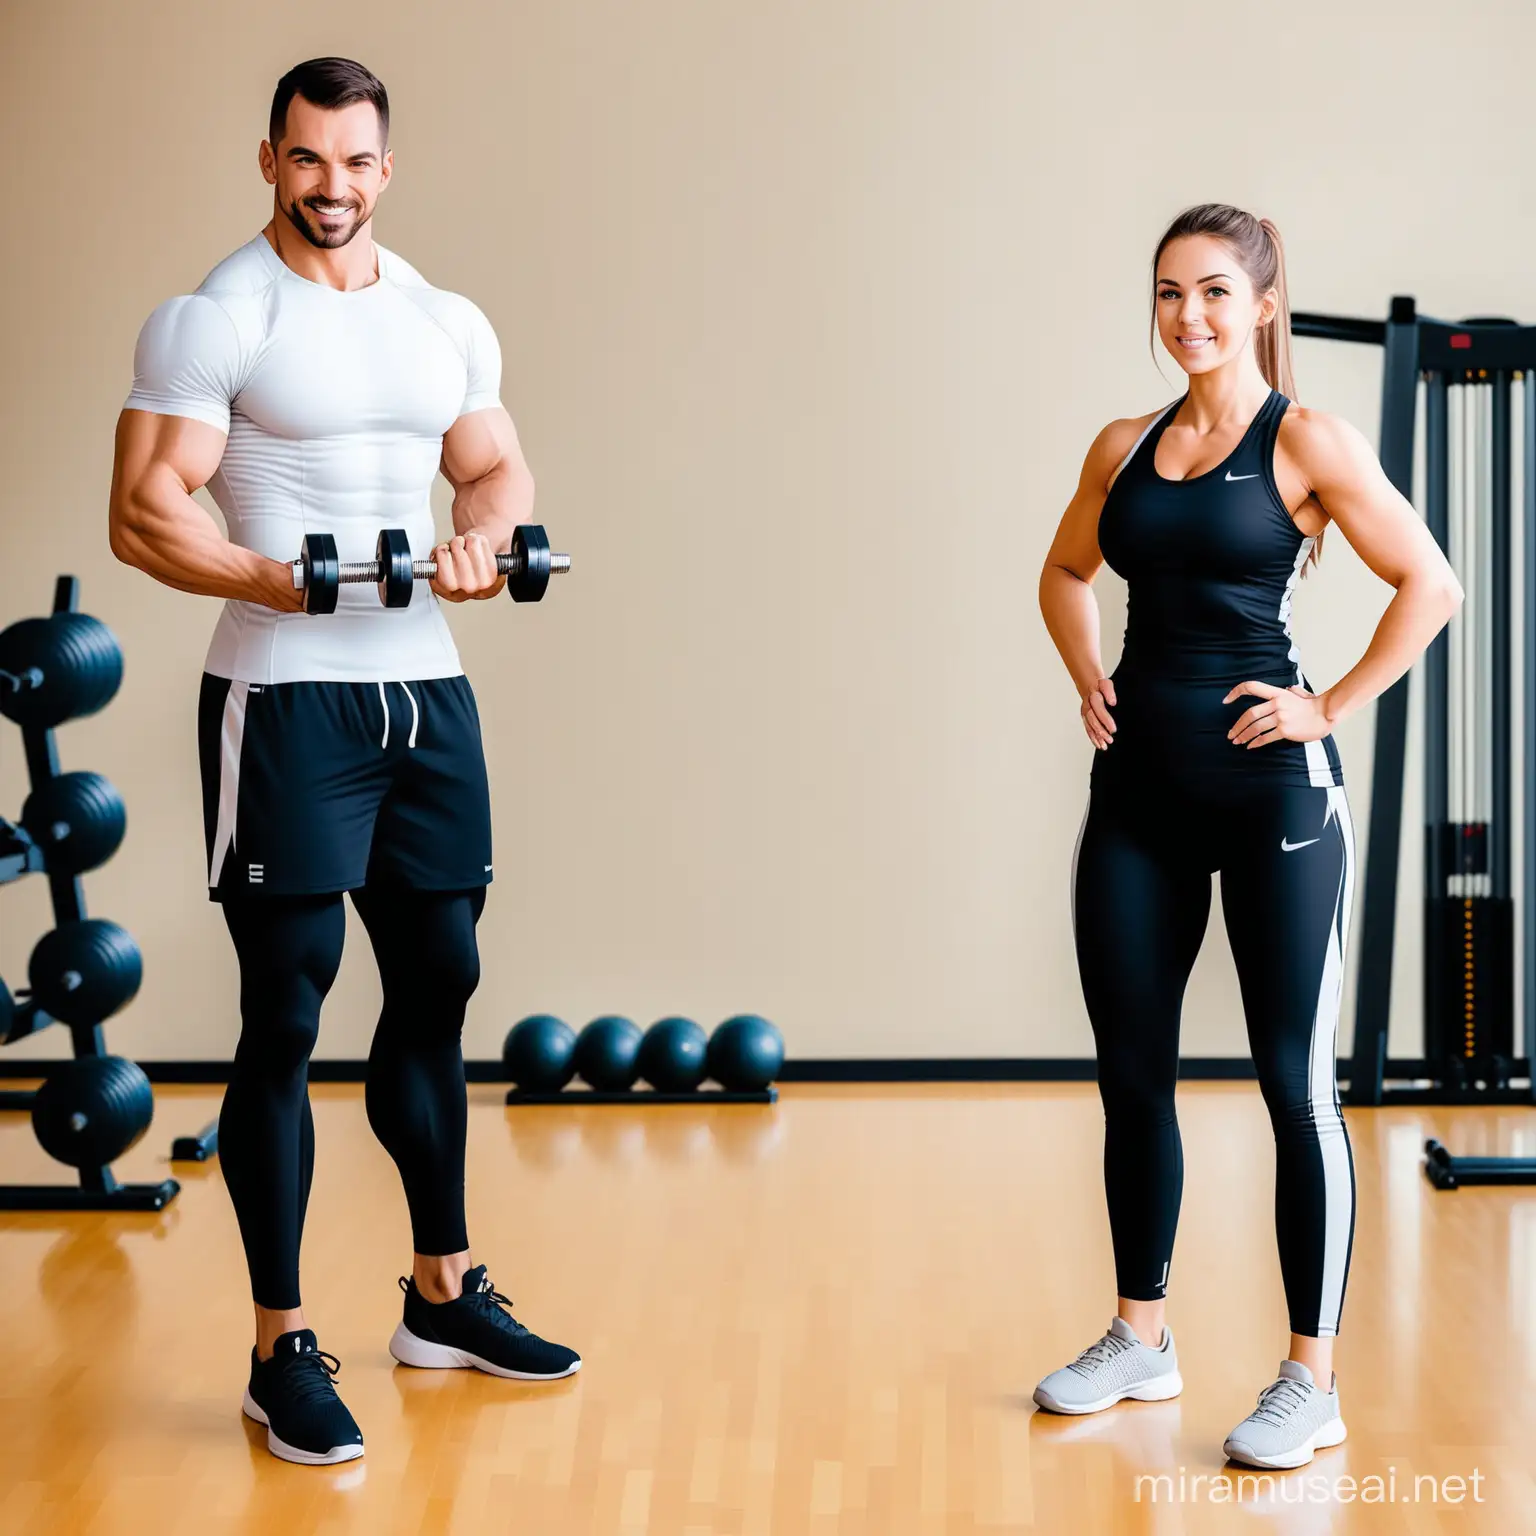 generate image of a man and woman in gym with full cloths  holding dumbles